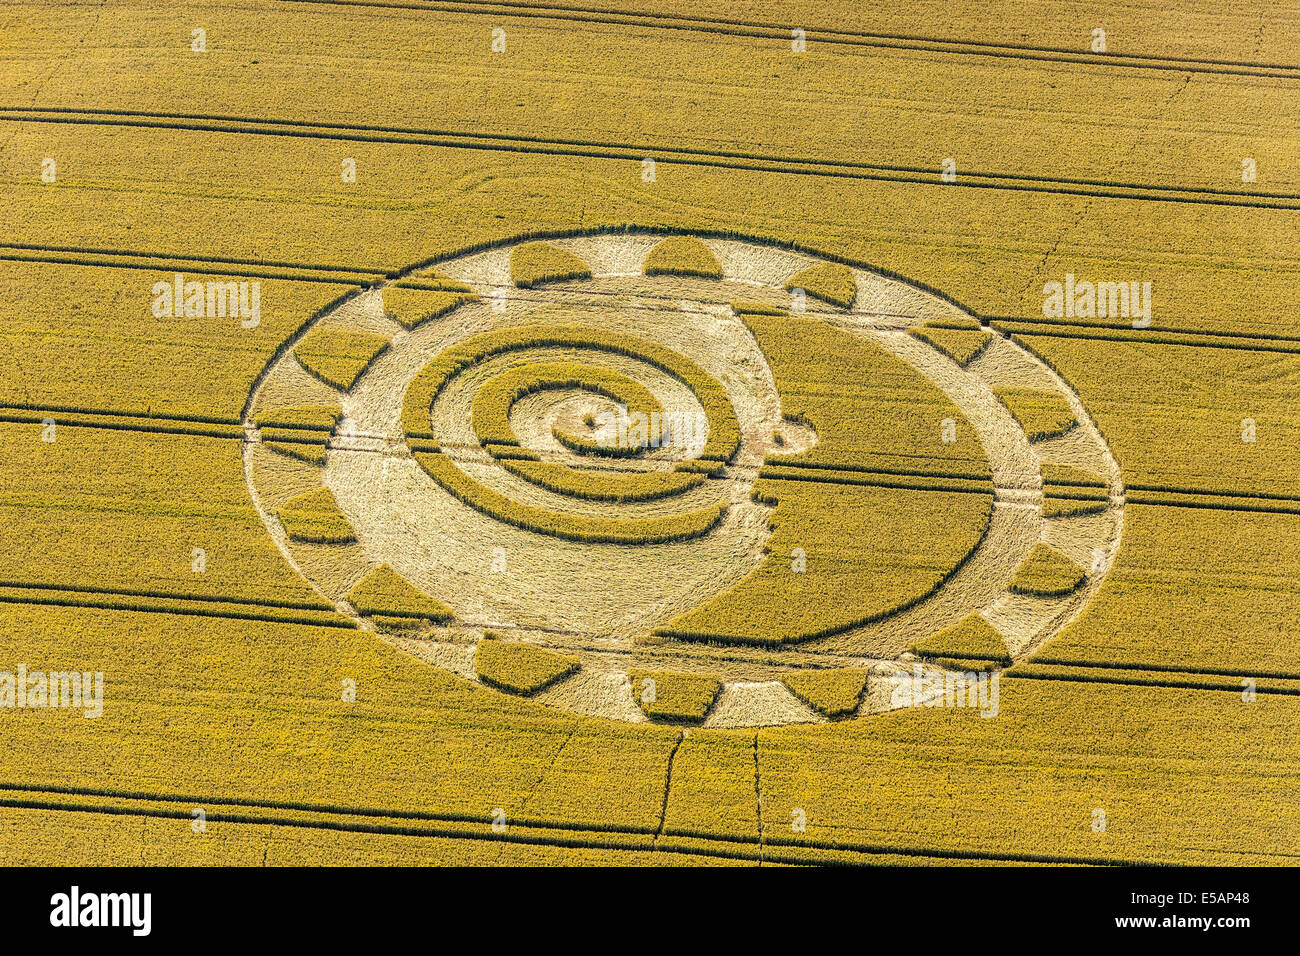 Crop Circle on the downs between Barbury Castle and Hackpen, south of Swindon Wiltshire England summer 2014. JMH6166 Stock Photo